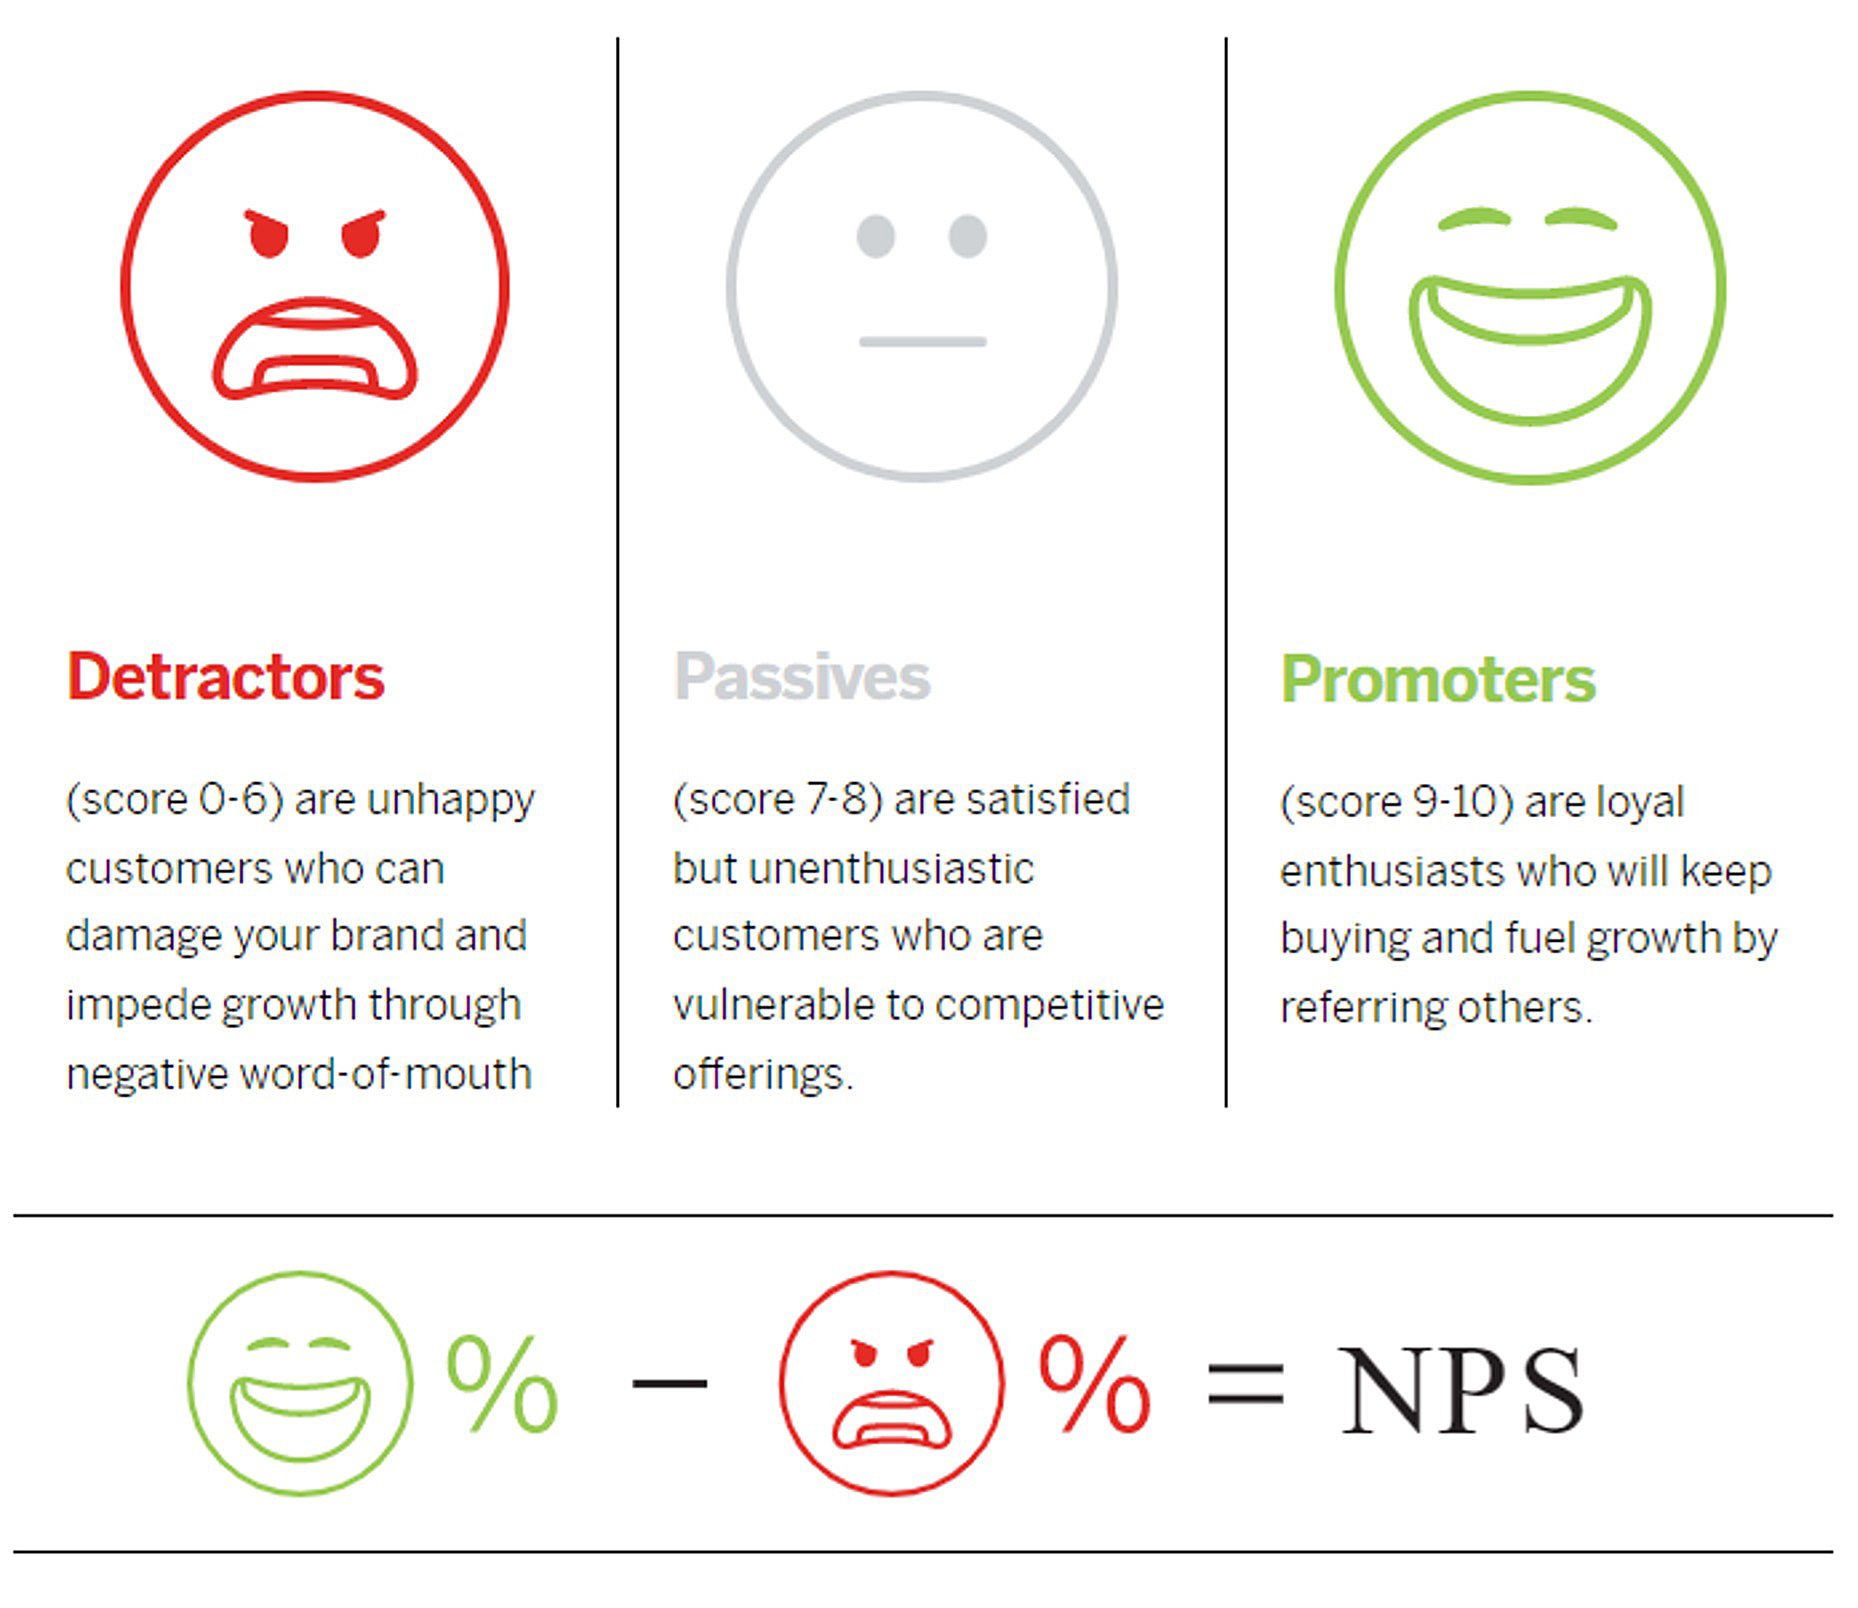 Different Types of NPS customers